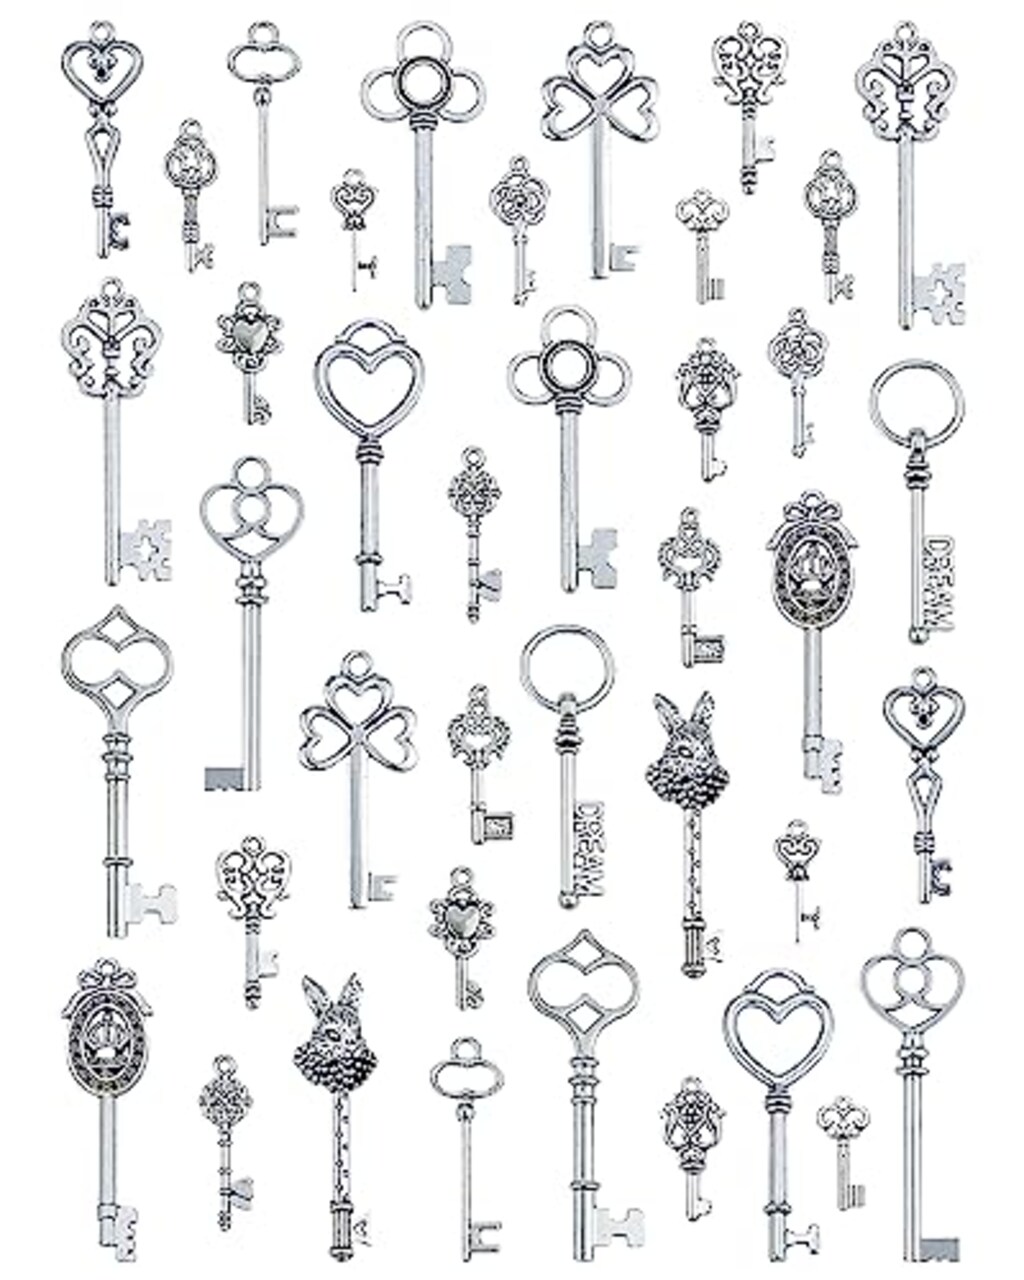 JIALEEY Vintage Skeleton Key Charms, 20 Type of 40PCS Antique Silver Key  Charms for Necklace Pendant DIY Jewelry Making Supplies Wedding Favors